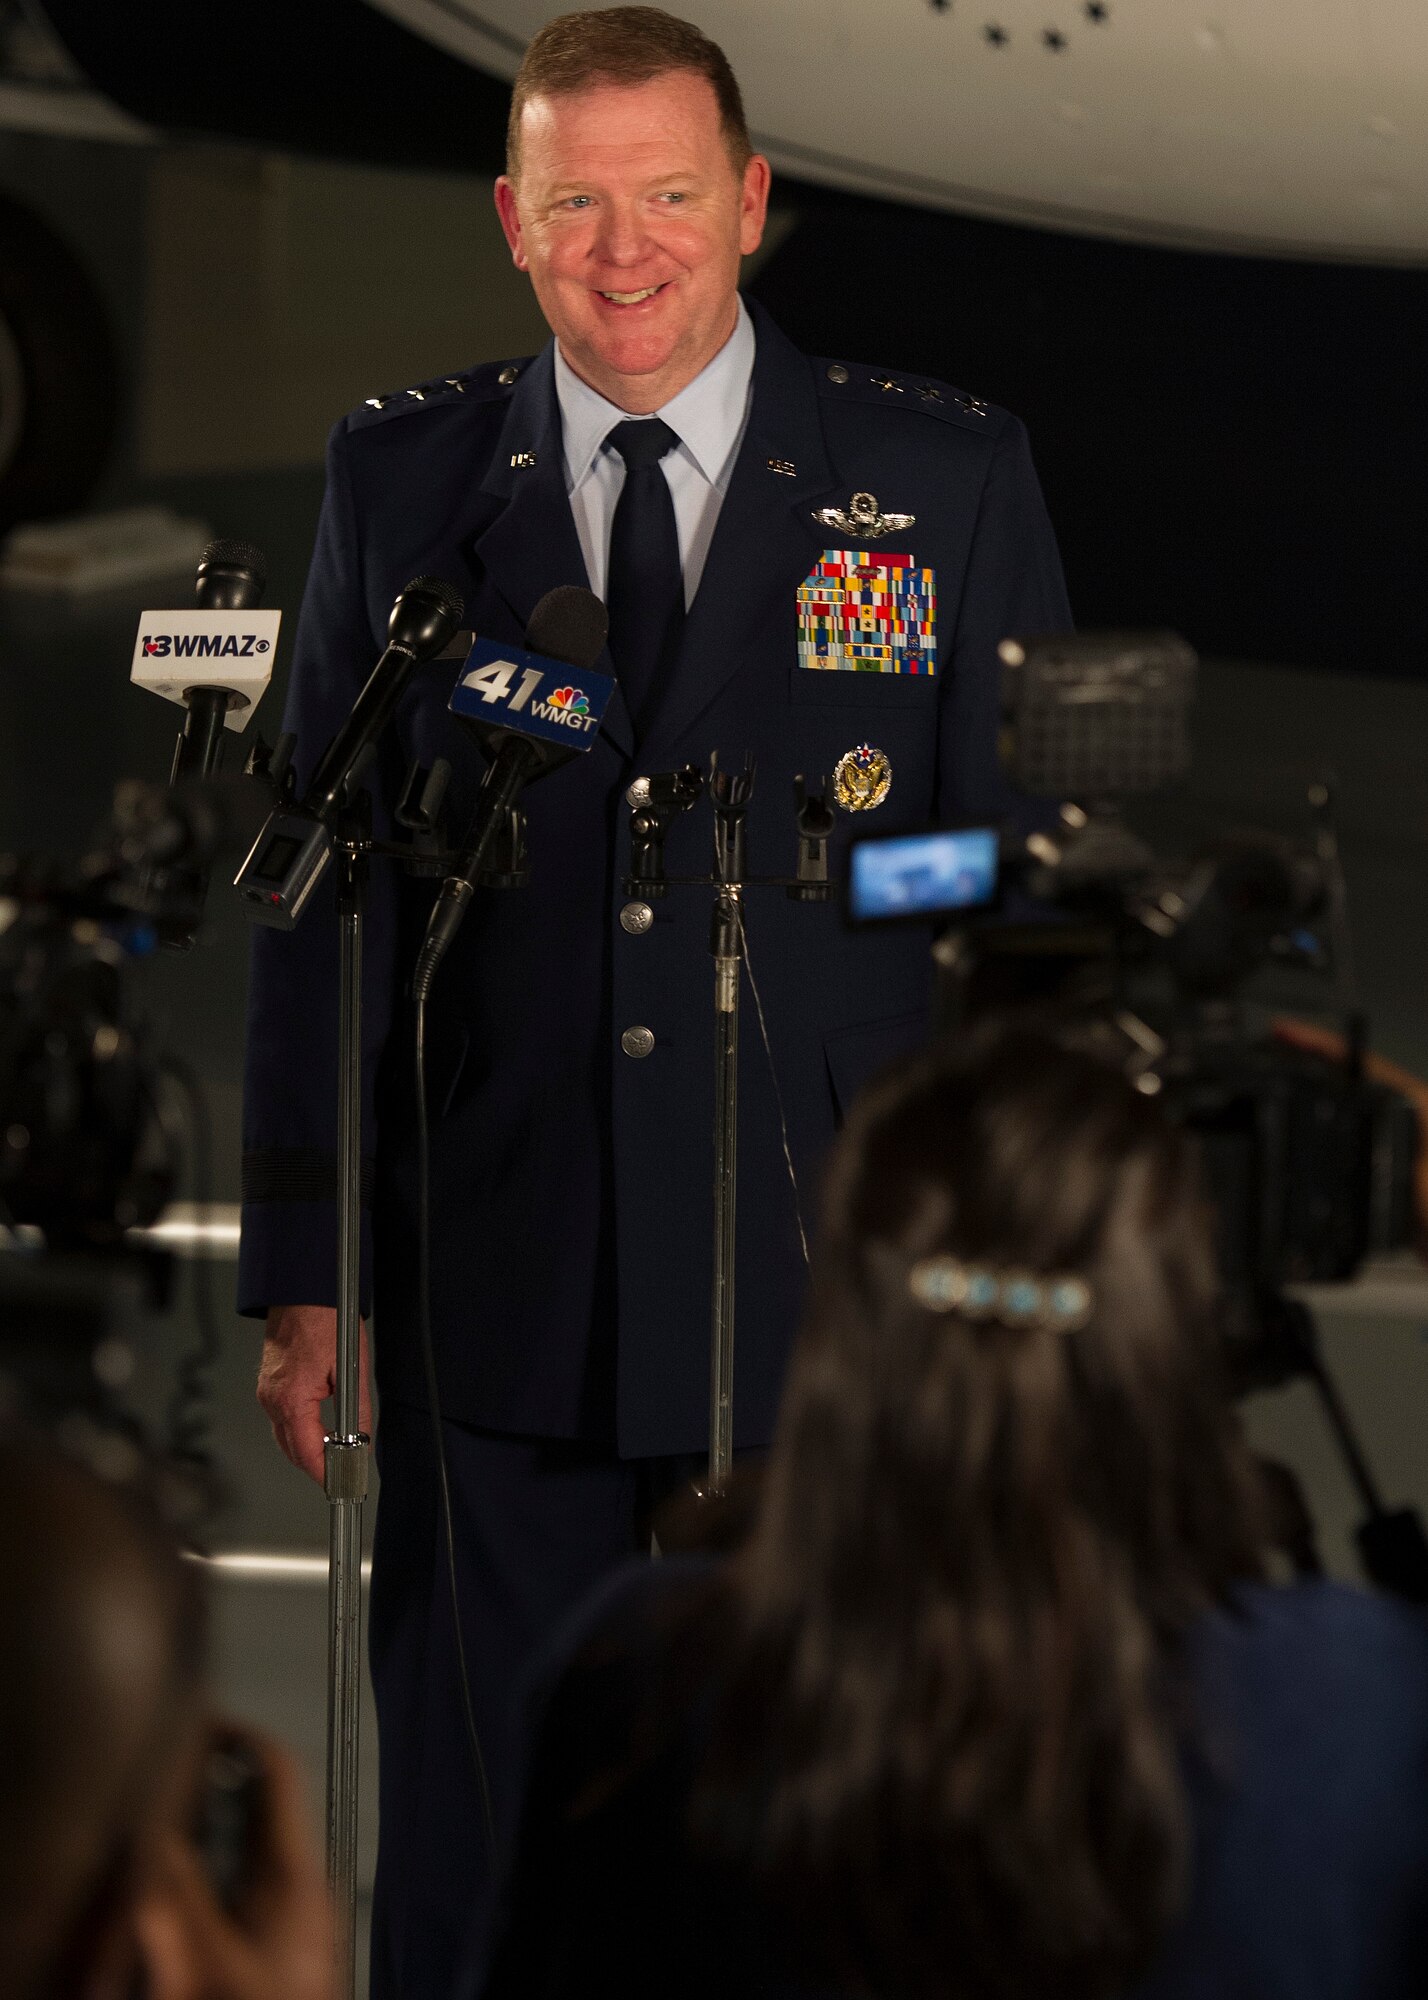 Newly appointed Commander of Air Force Reserve Command, Lt. Gen. Richard W. Scobee is interviewed by local news affiliates after his assumption-of-command ceremony at the Museum of Aviation, Warner Robins, Georgia, Sept. 27, 2018. (U.S. Air Force photo by Master Sgt. Stephen D. Schester)